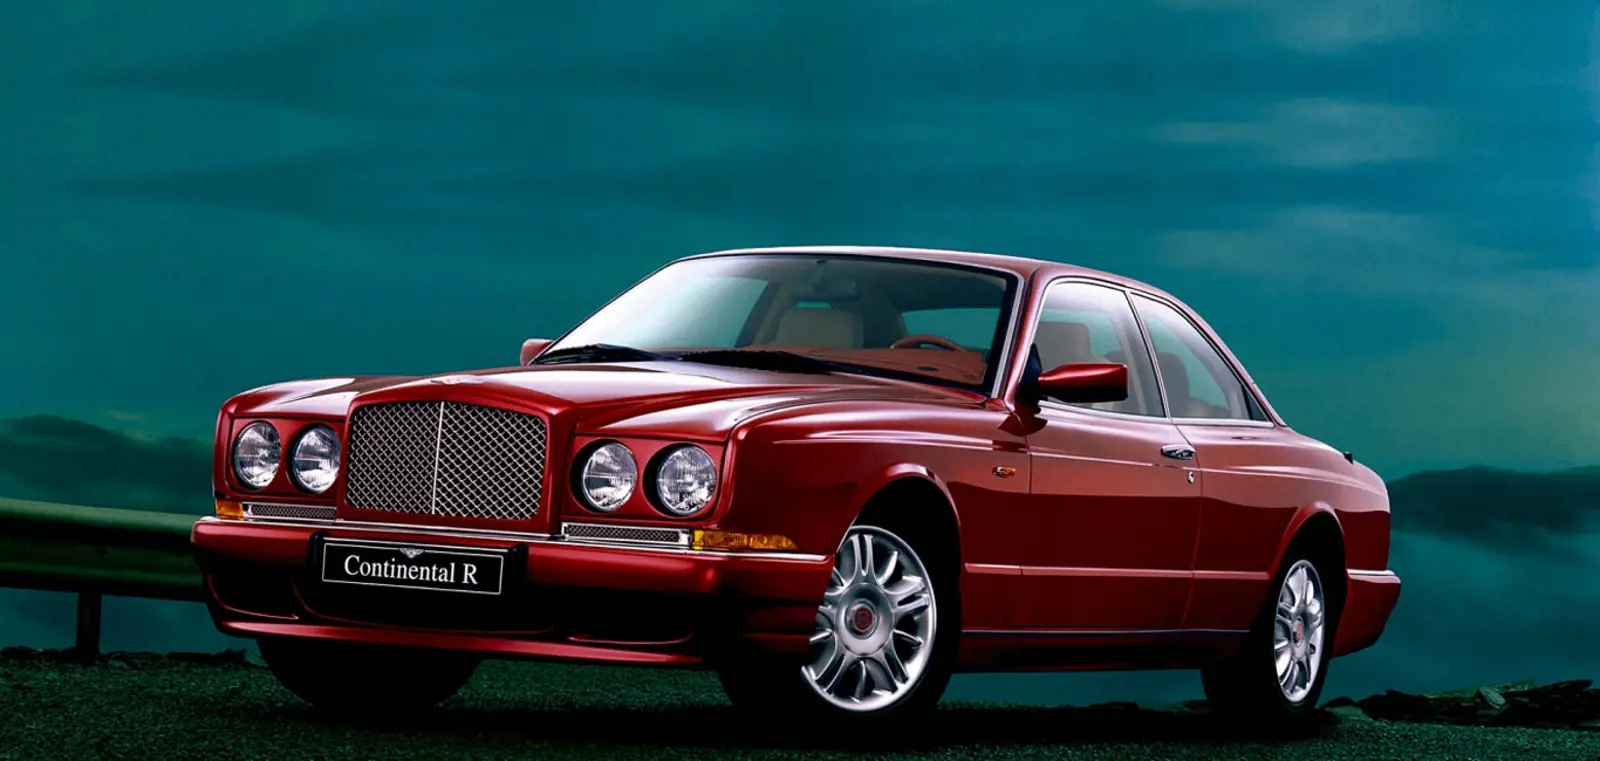 The Story Of The Bentley Continental - The Continental R